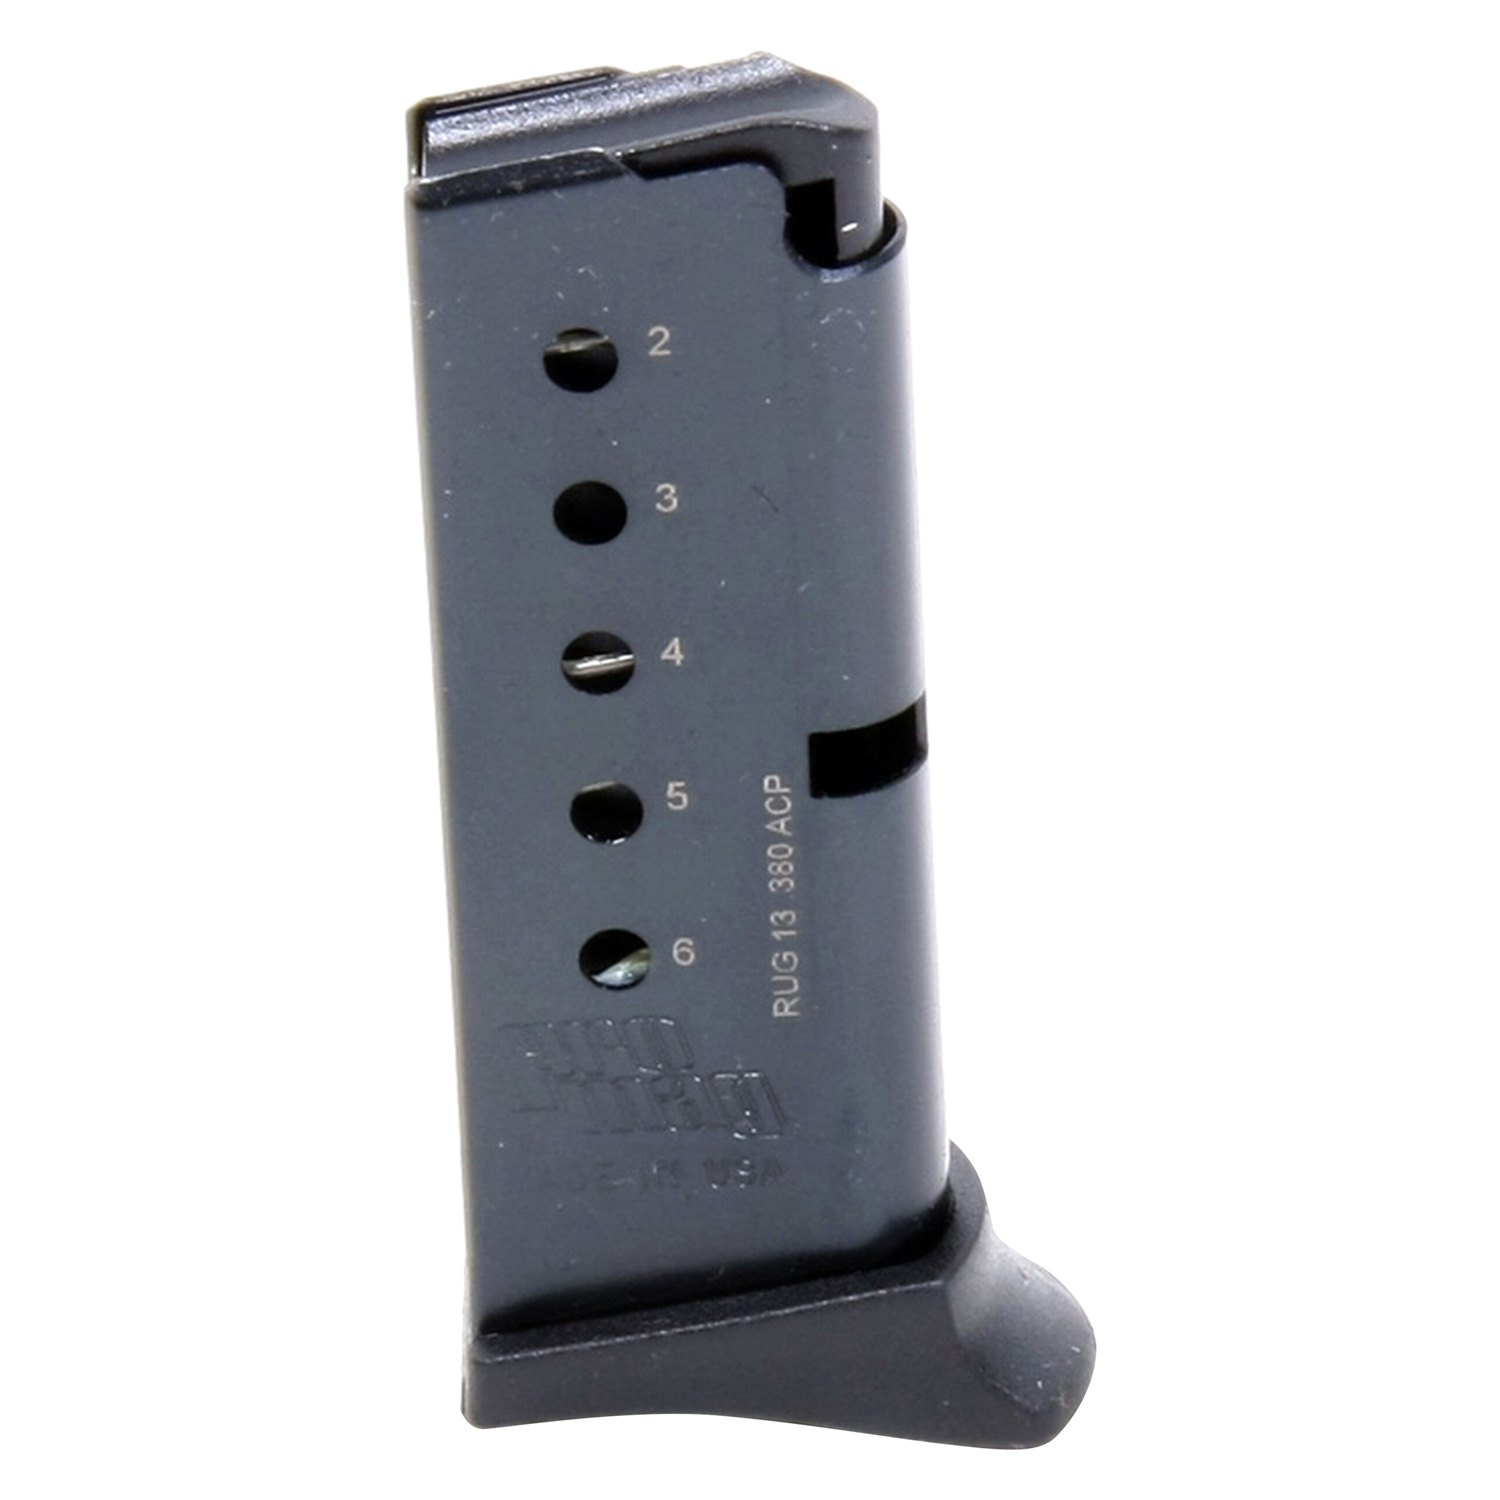 ProMag ® RUG13 - .380 ACP 6 Rounds Blue Steel Ruger LCP ™ Magazine.